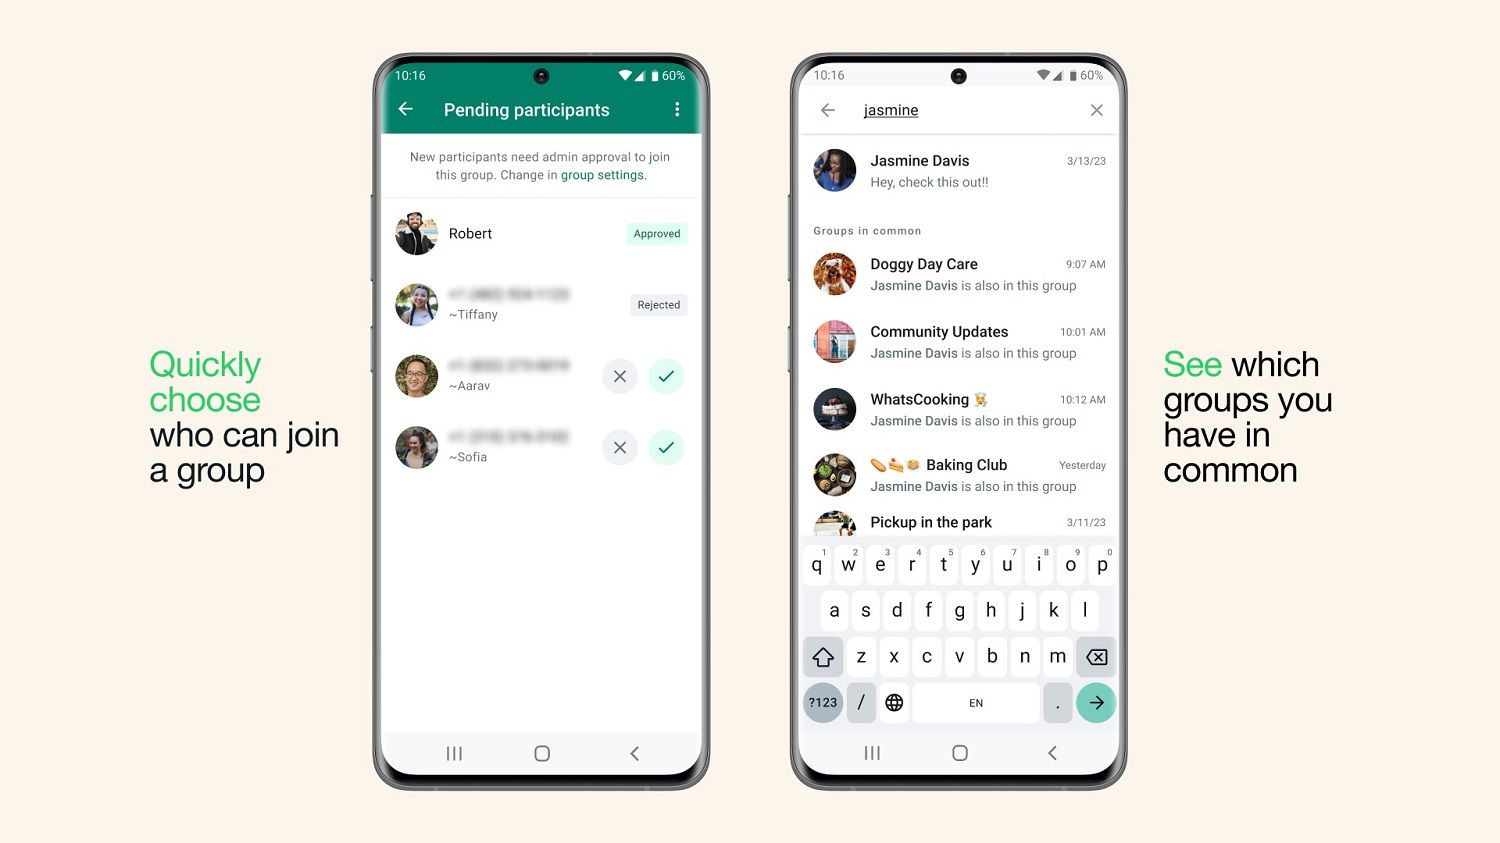 Major WhatsApp updates and features coming in 2023